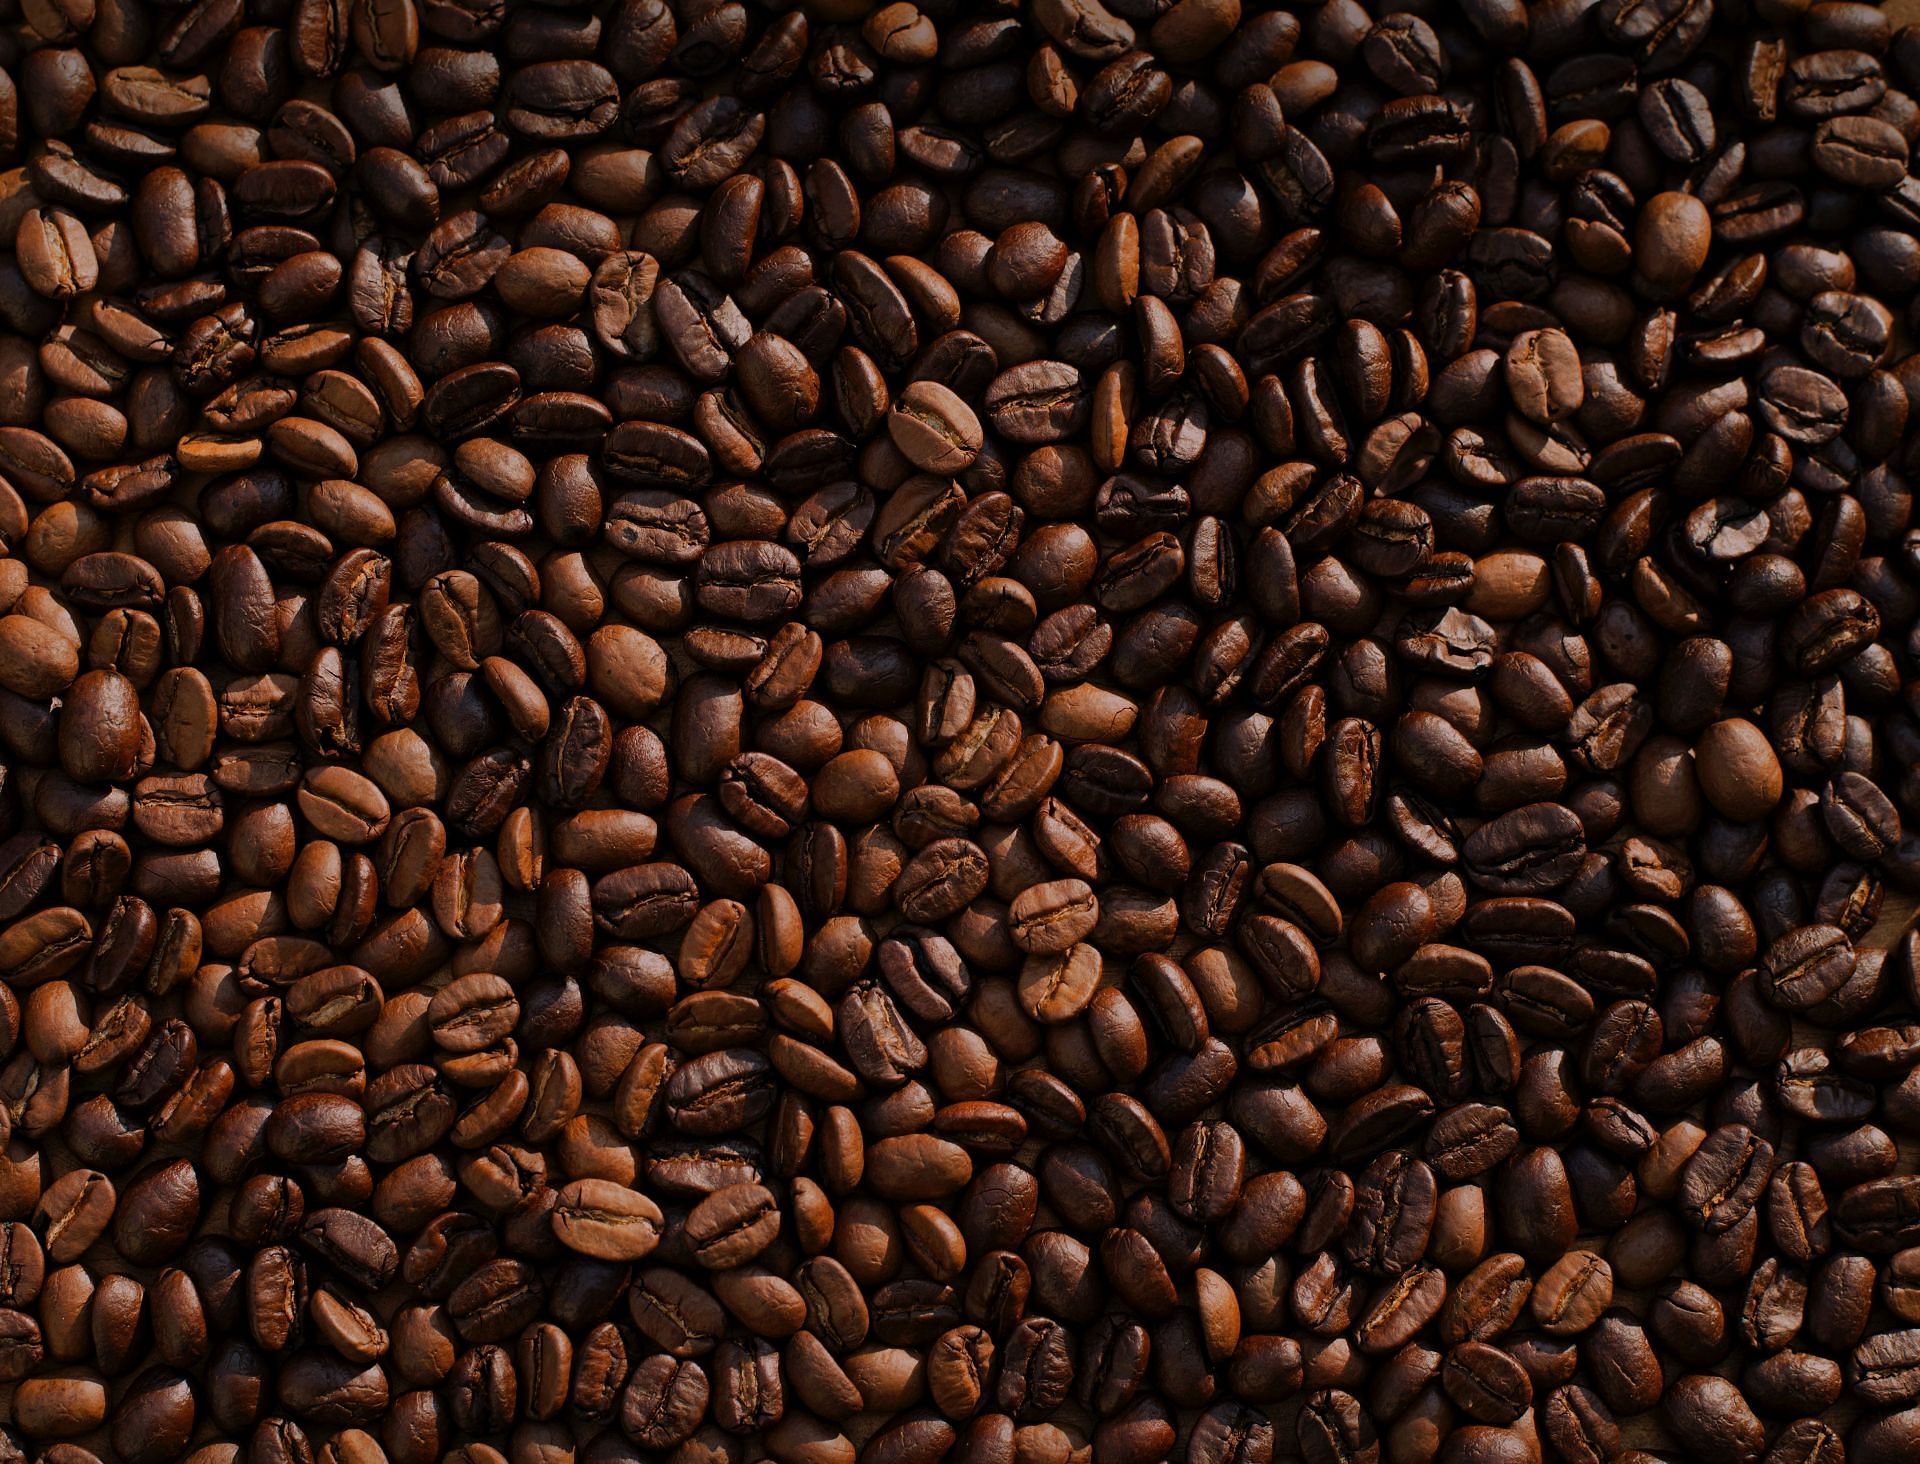 Different types of coffee beans are explained. (Image via Unsplash / Mike Kenneally)